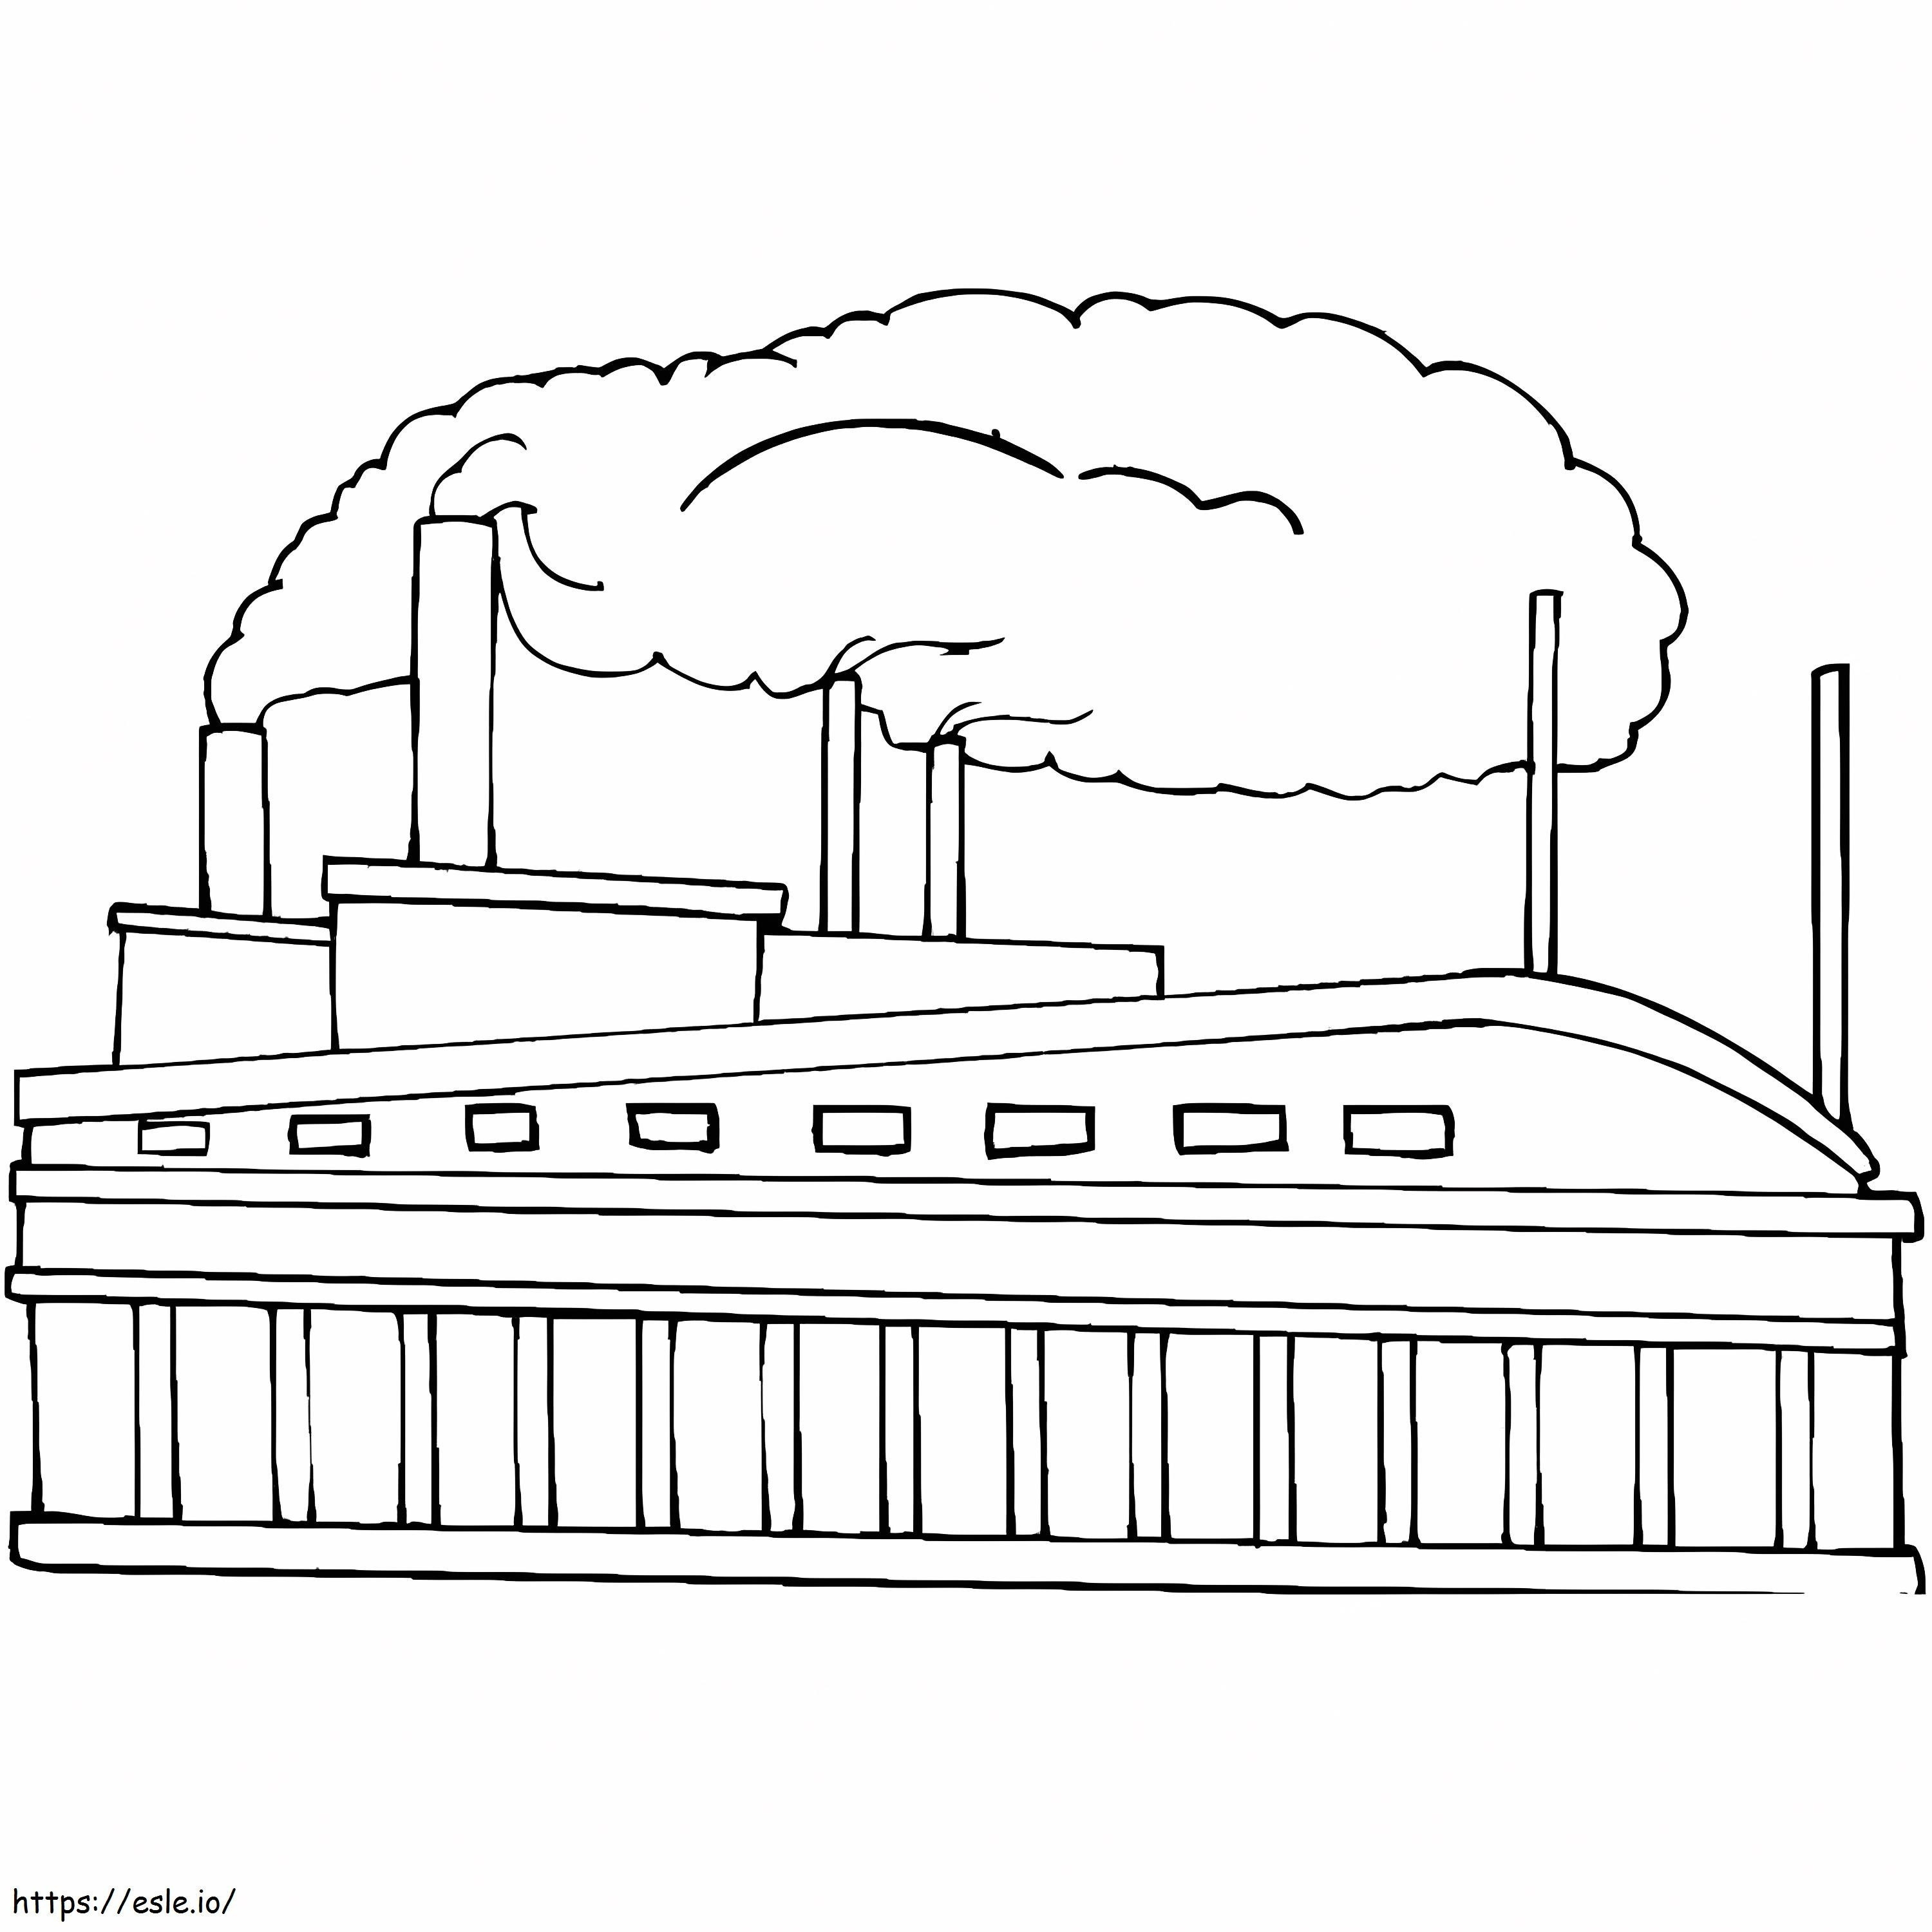 Factory To Color coloring page